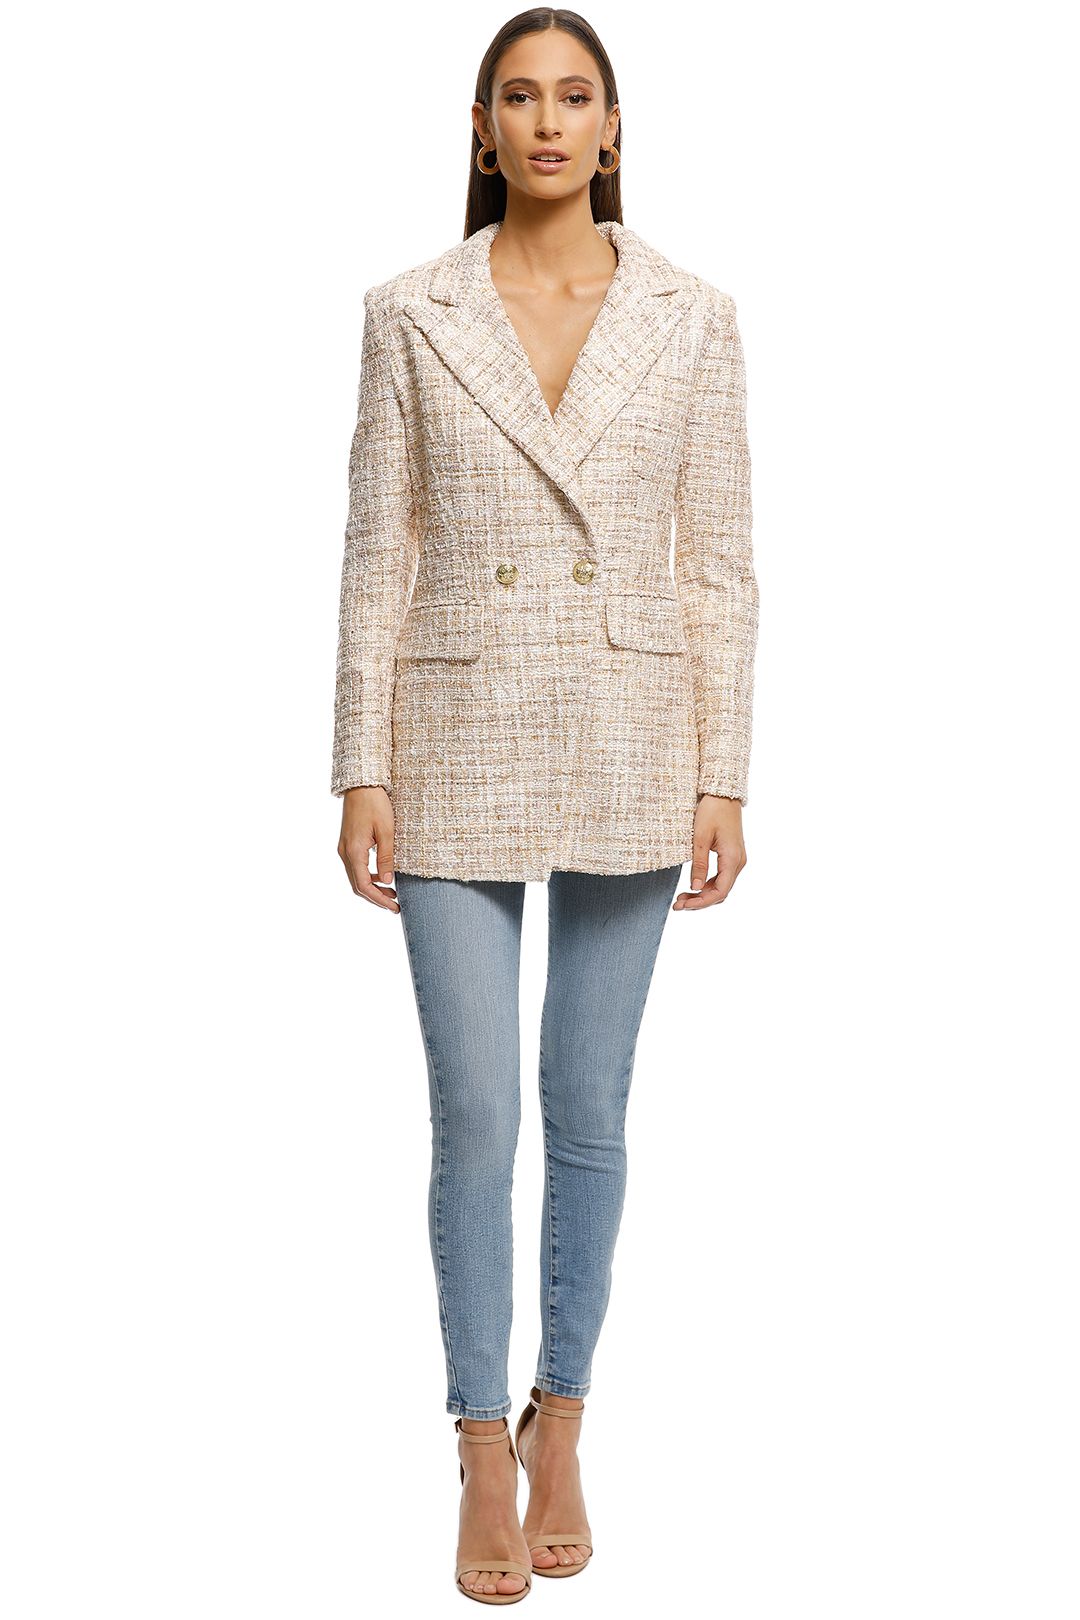 Alexia-Admor-Double-Breasted-Tweed-Jacket-Cream-Front